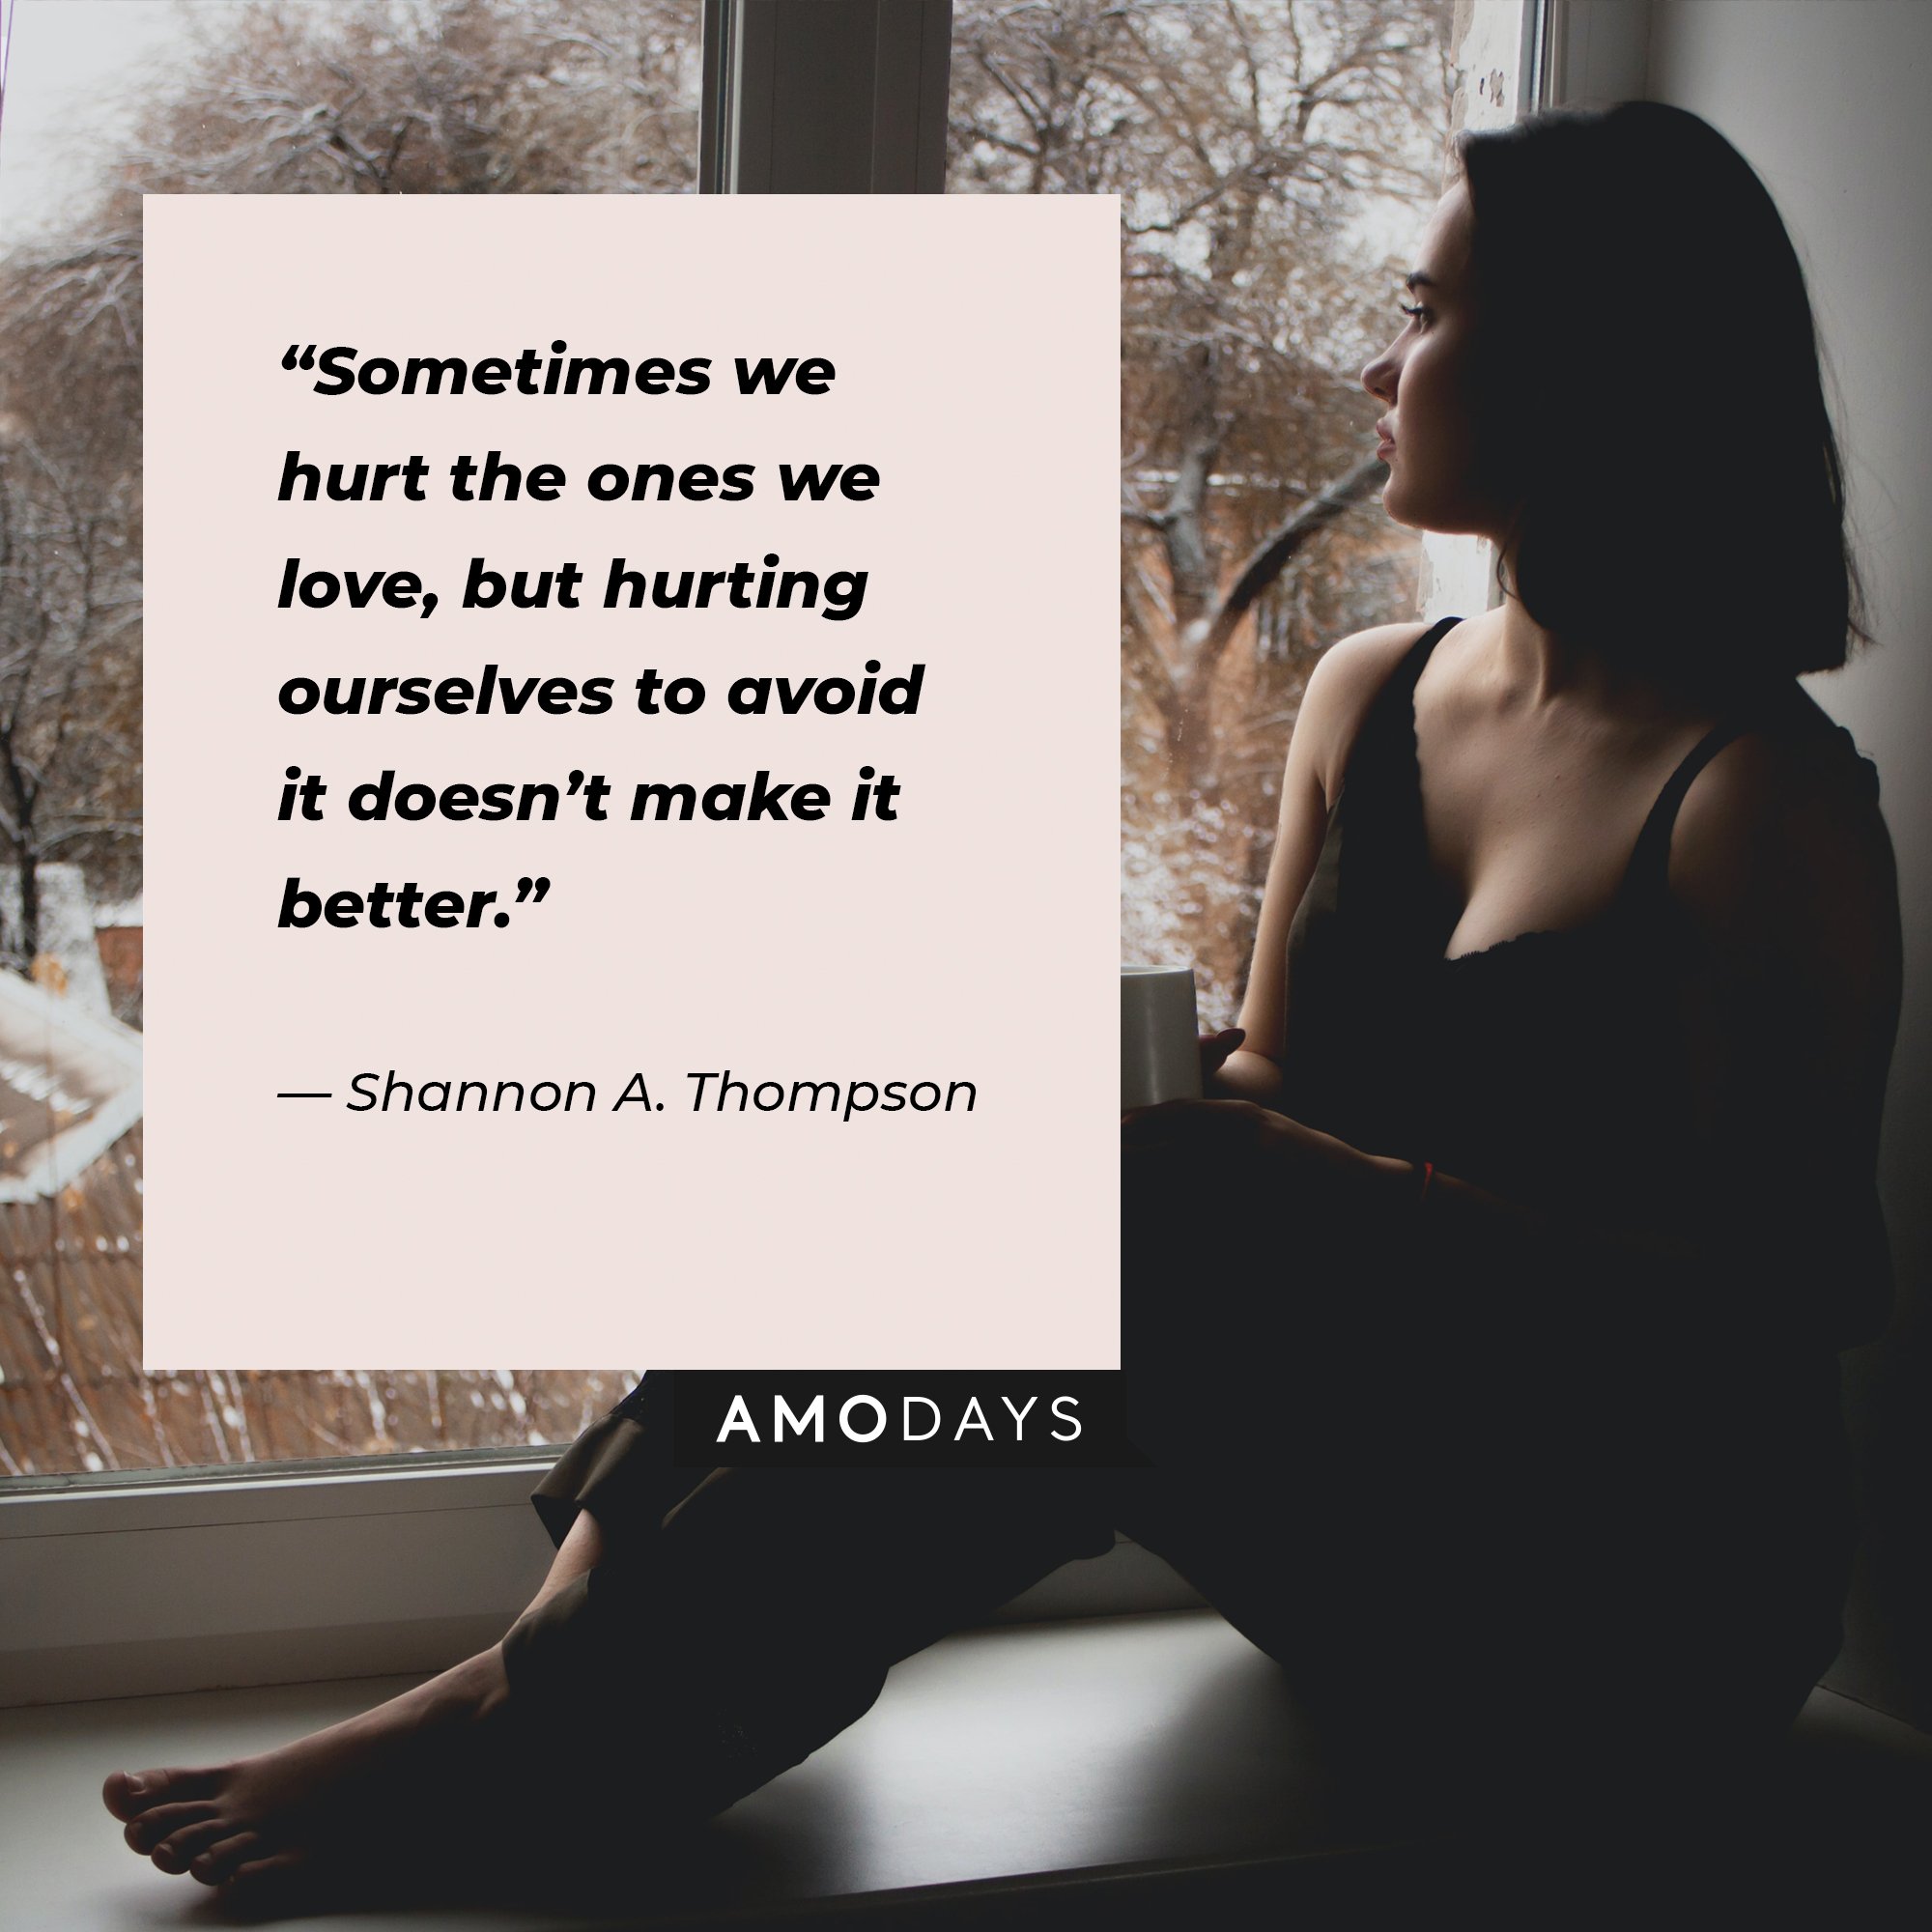 Shannon A. Thompson’s quote:“Sometimes we hurt the ones we love, but hurting ourselves to avoid it doesn’t make it better.” | Image: AmoDays